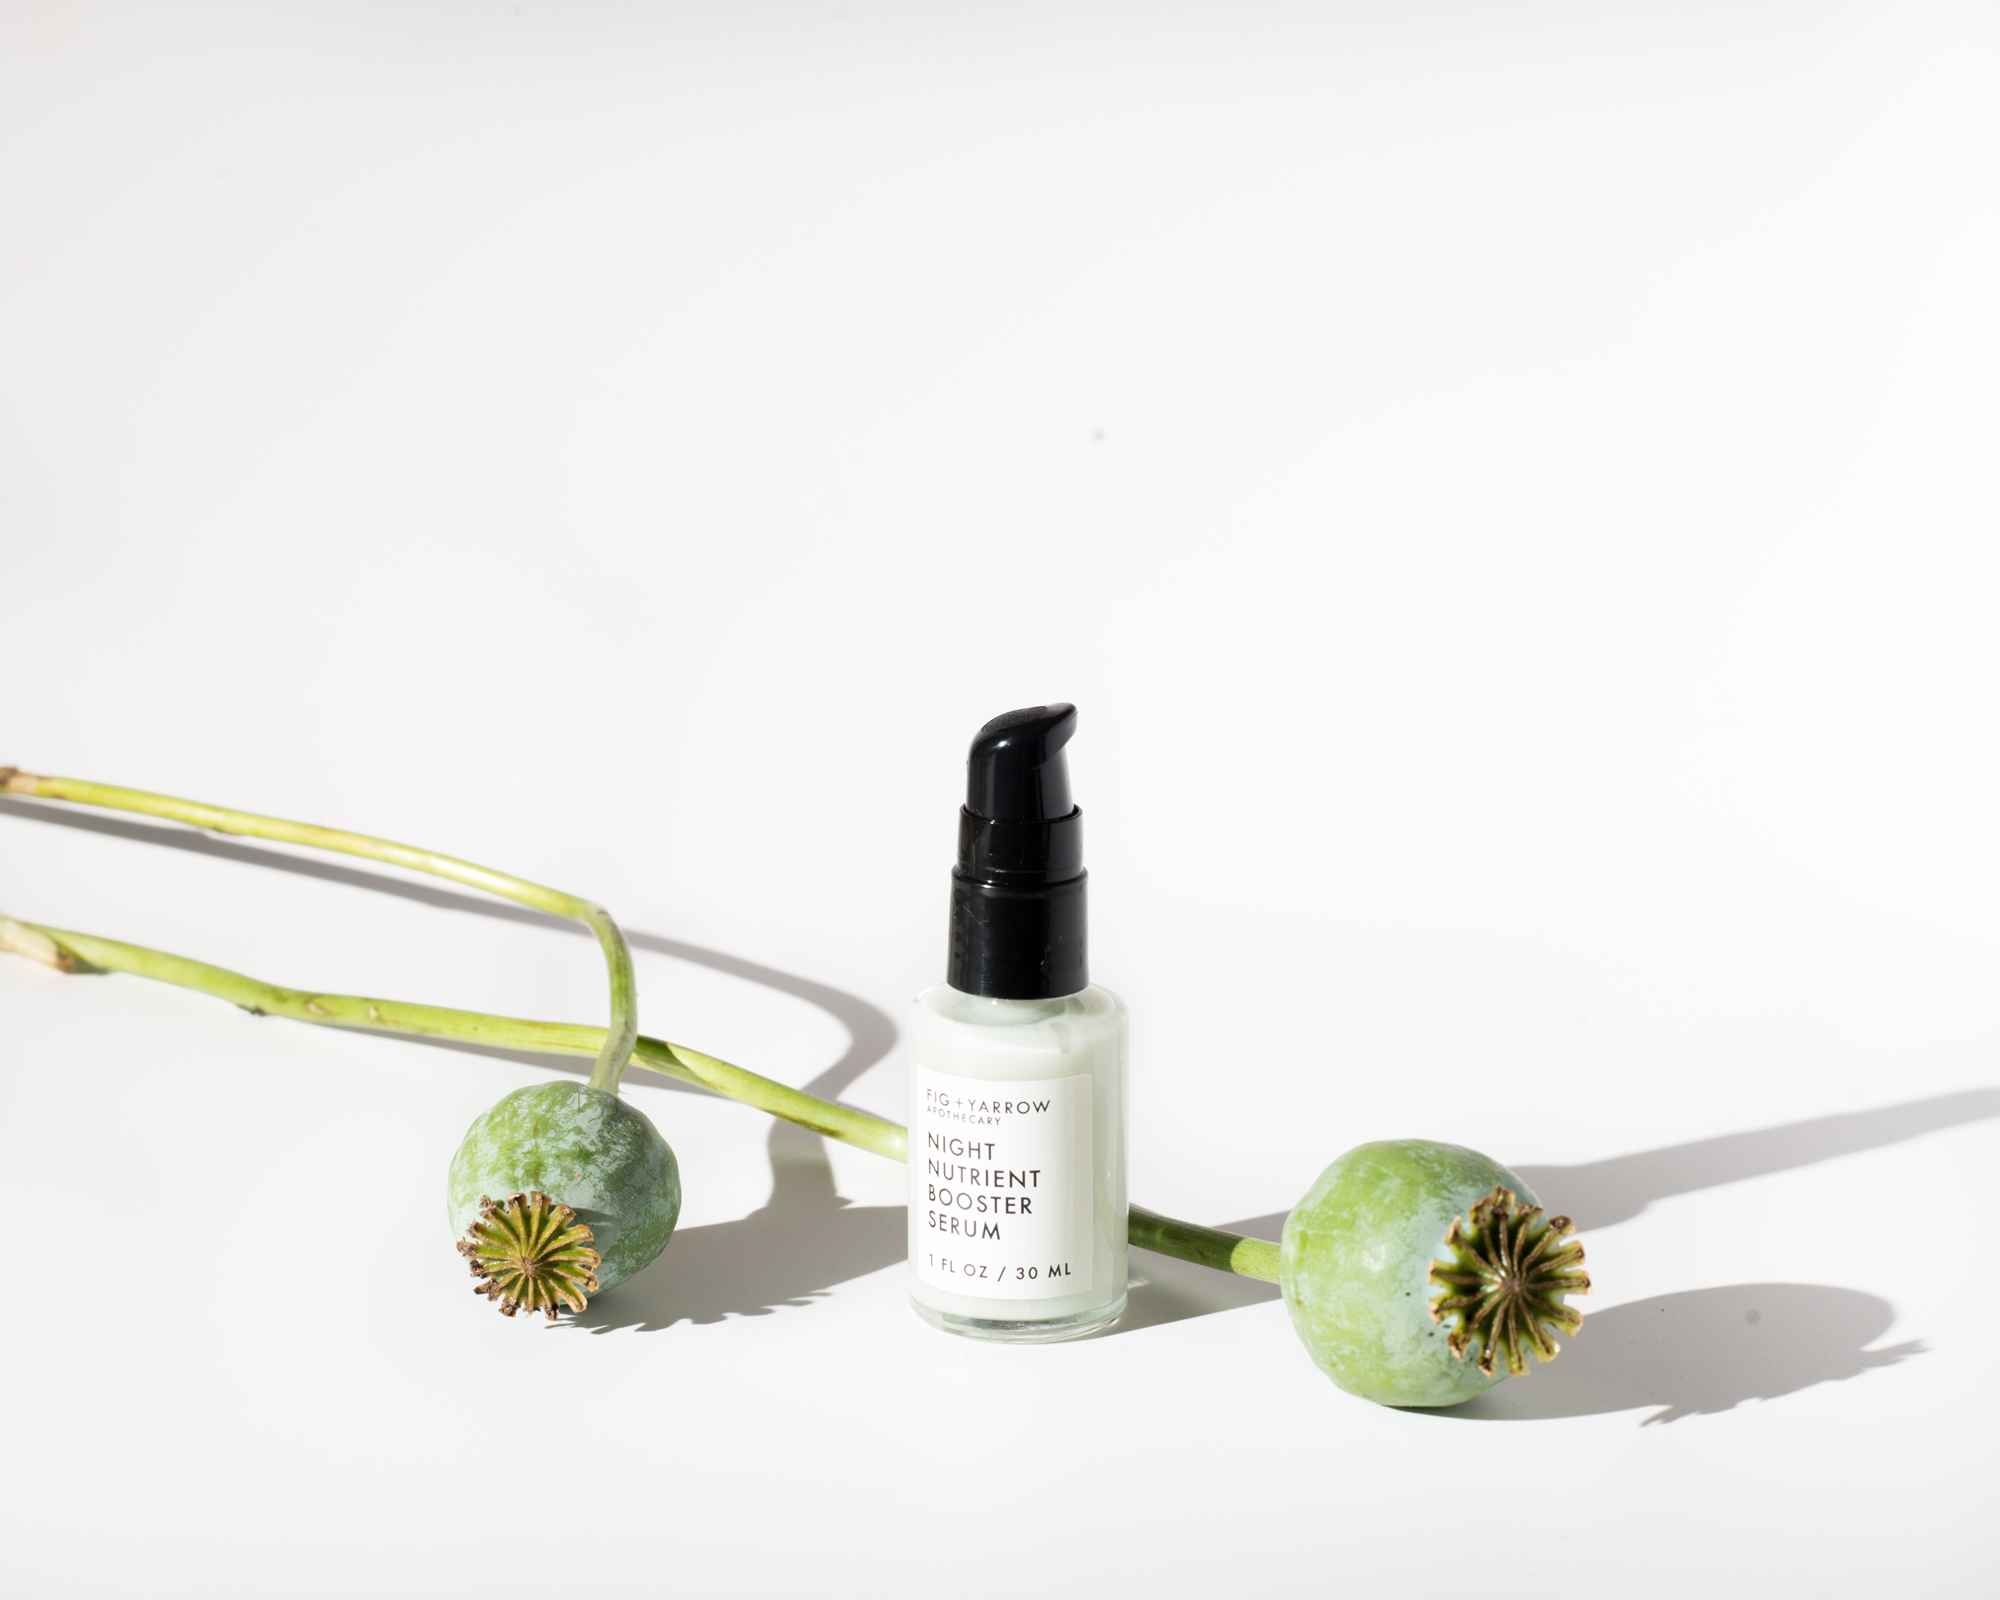 fig and yarrow night nutrient booster serum